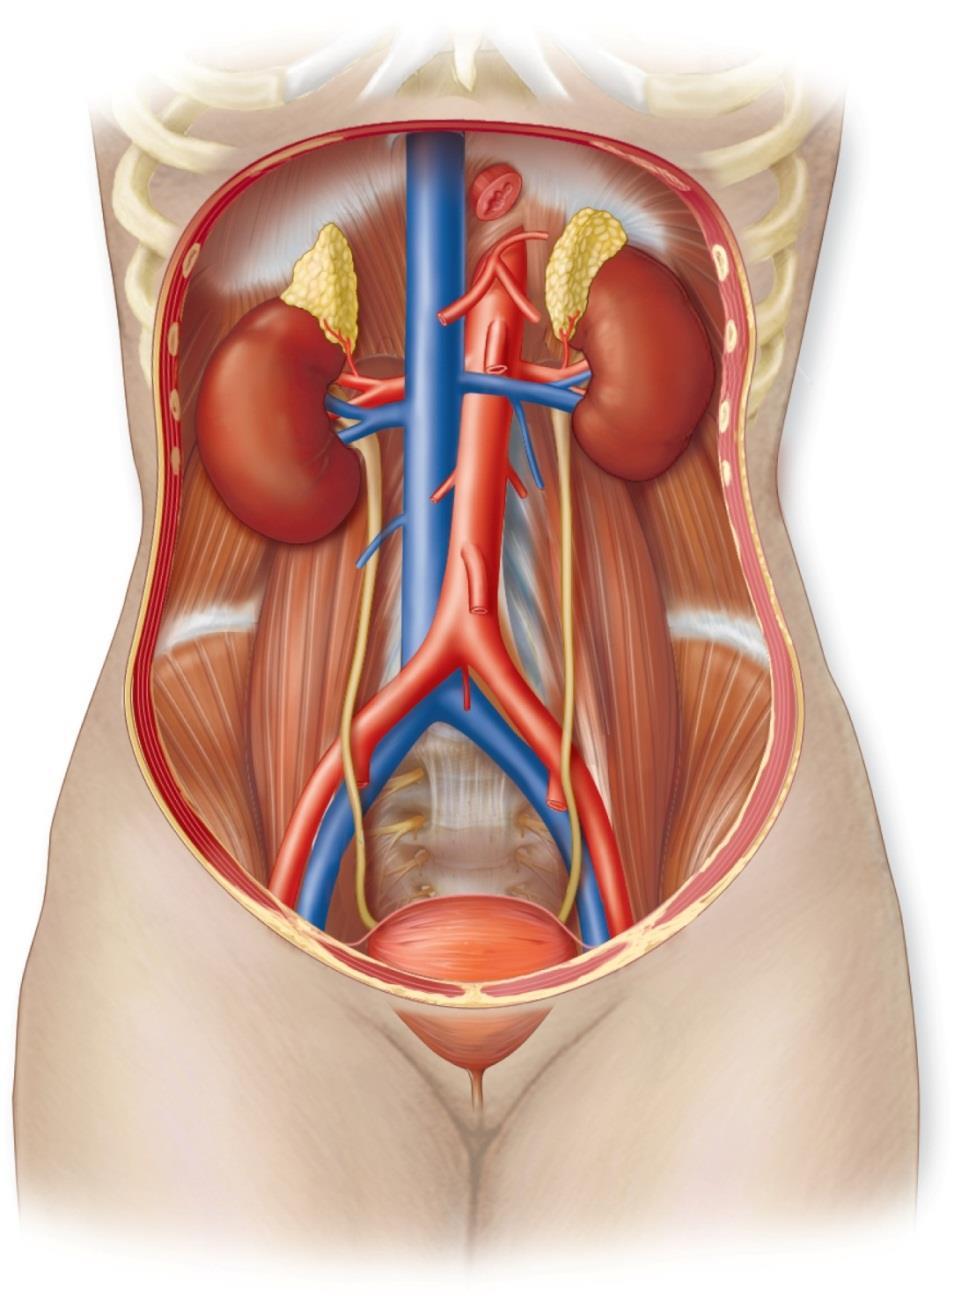 11.1 Urinary system Overview of the urinary system Adrenal glands